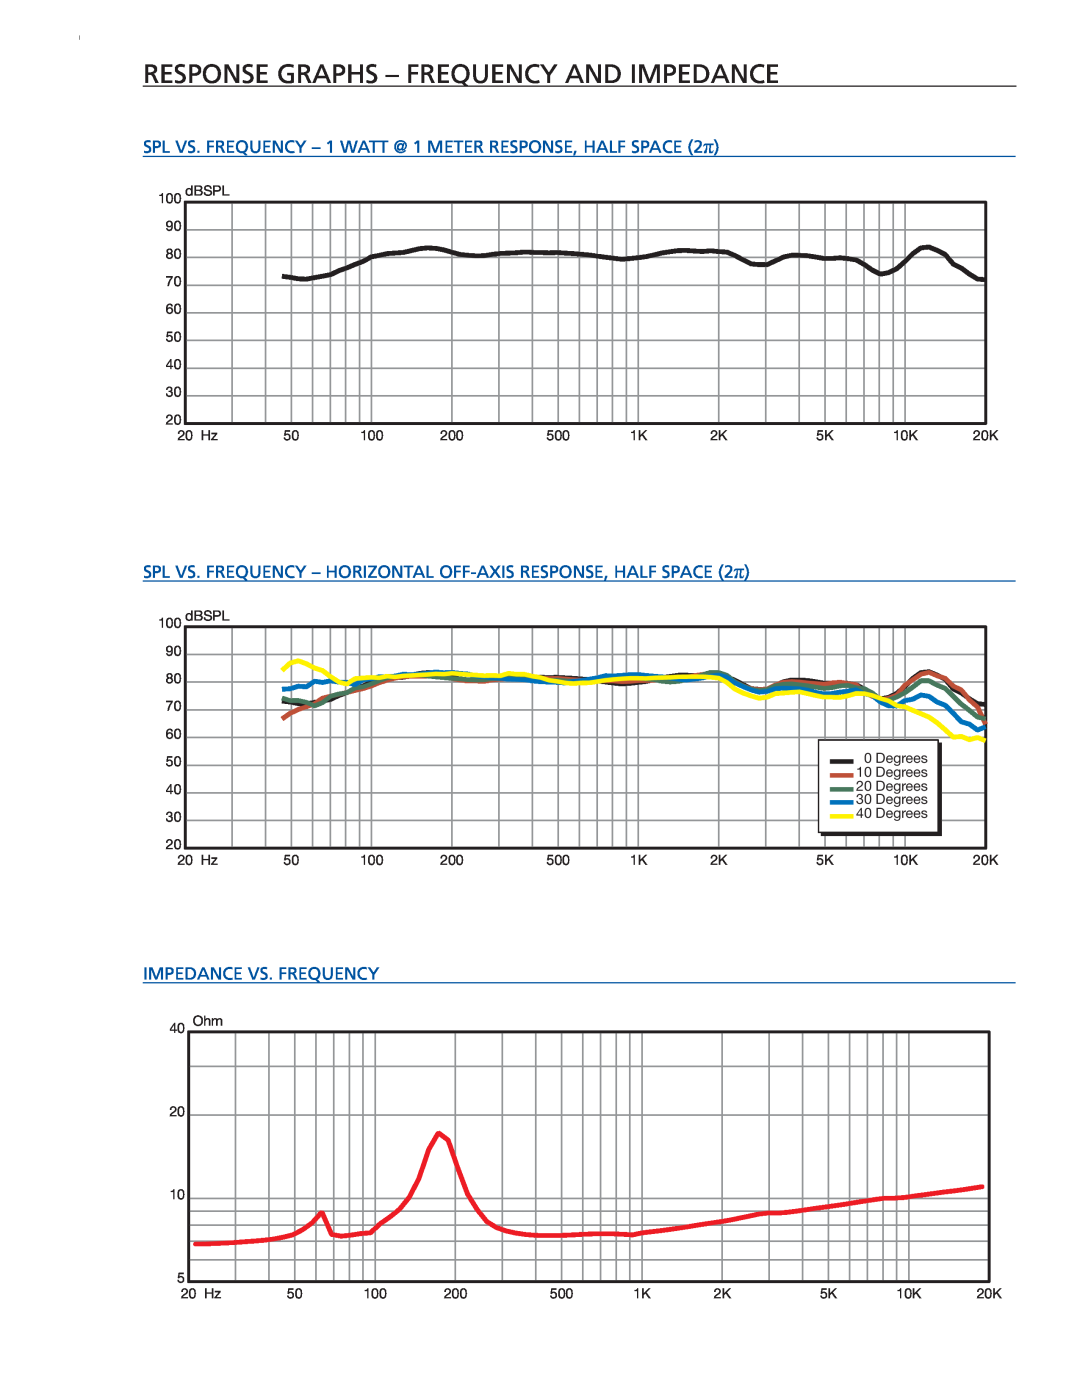 Extron electronic SI 3C LP warranty response graphs - frequency and impedance 